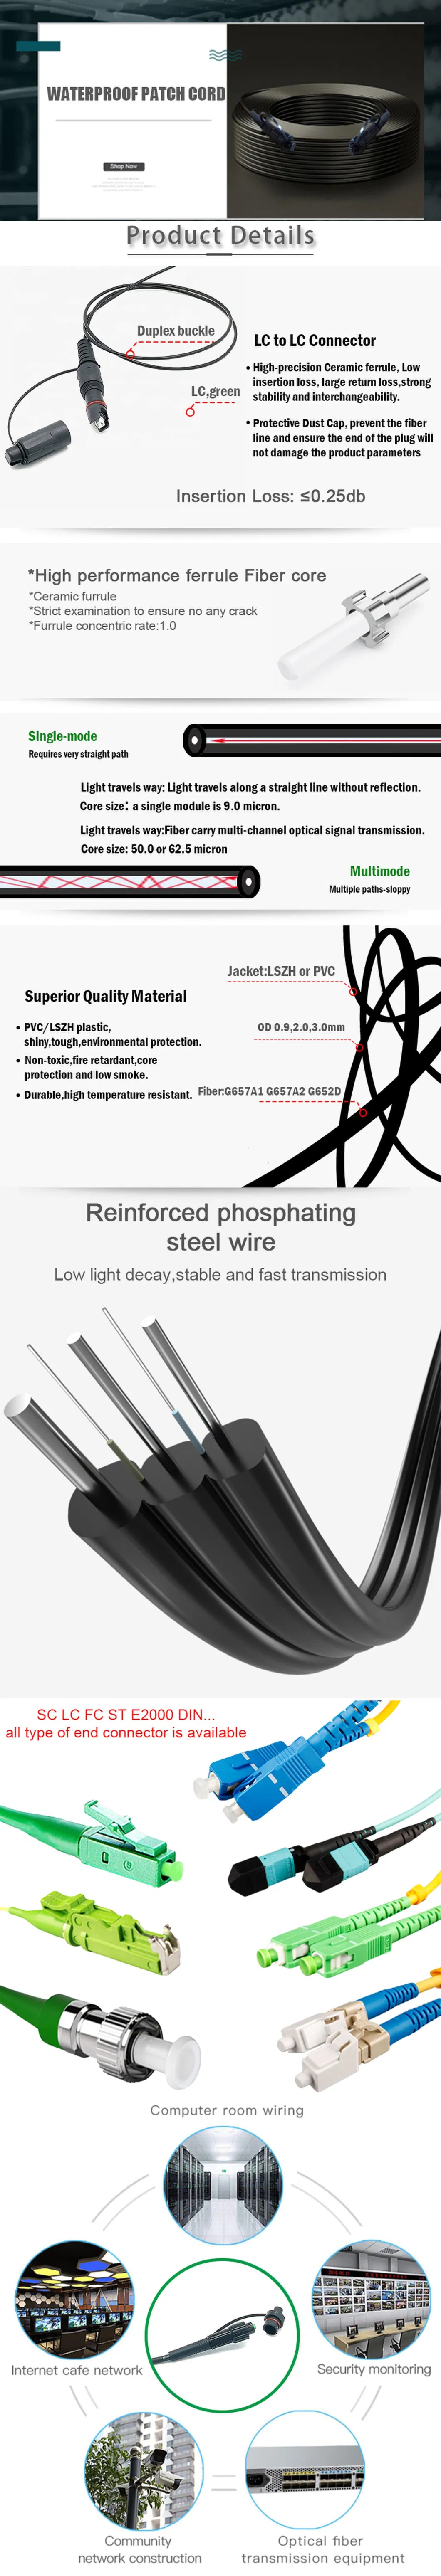 Gcabling 10m 20m 50m Drop Cable Patchcord Sc to Sc Sm Simplex Outdoor for Optic Fiber Joint